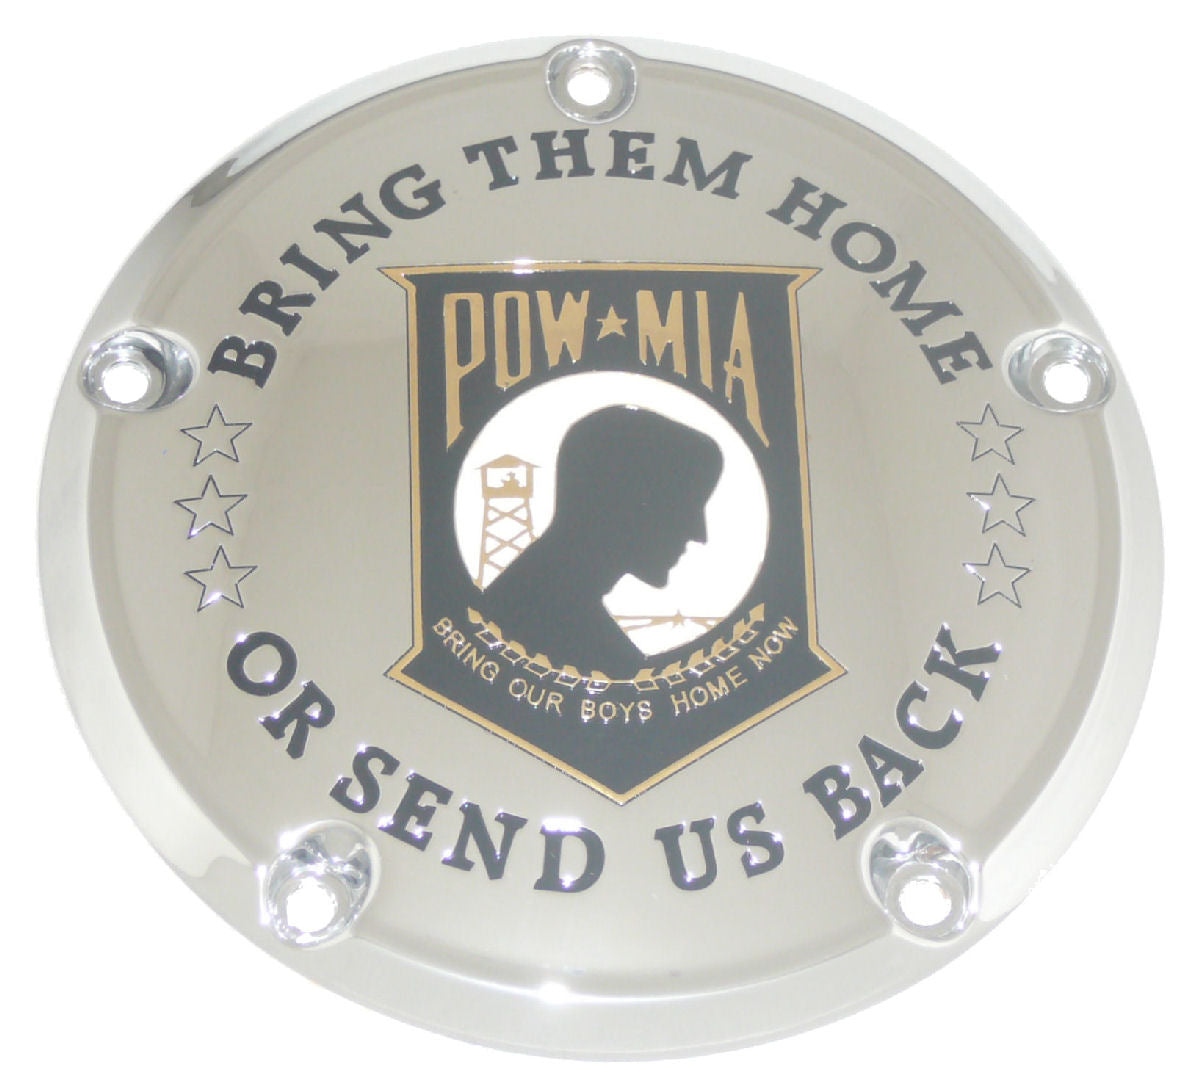 POWMIA, Gold Plated - Bring Them Home or Send Us Back